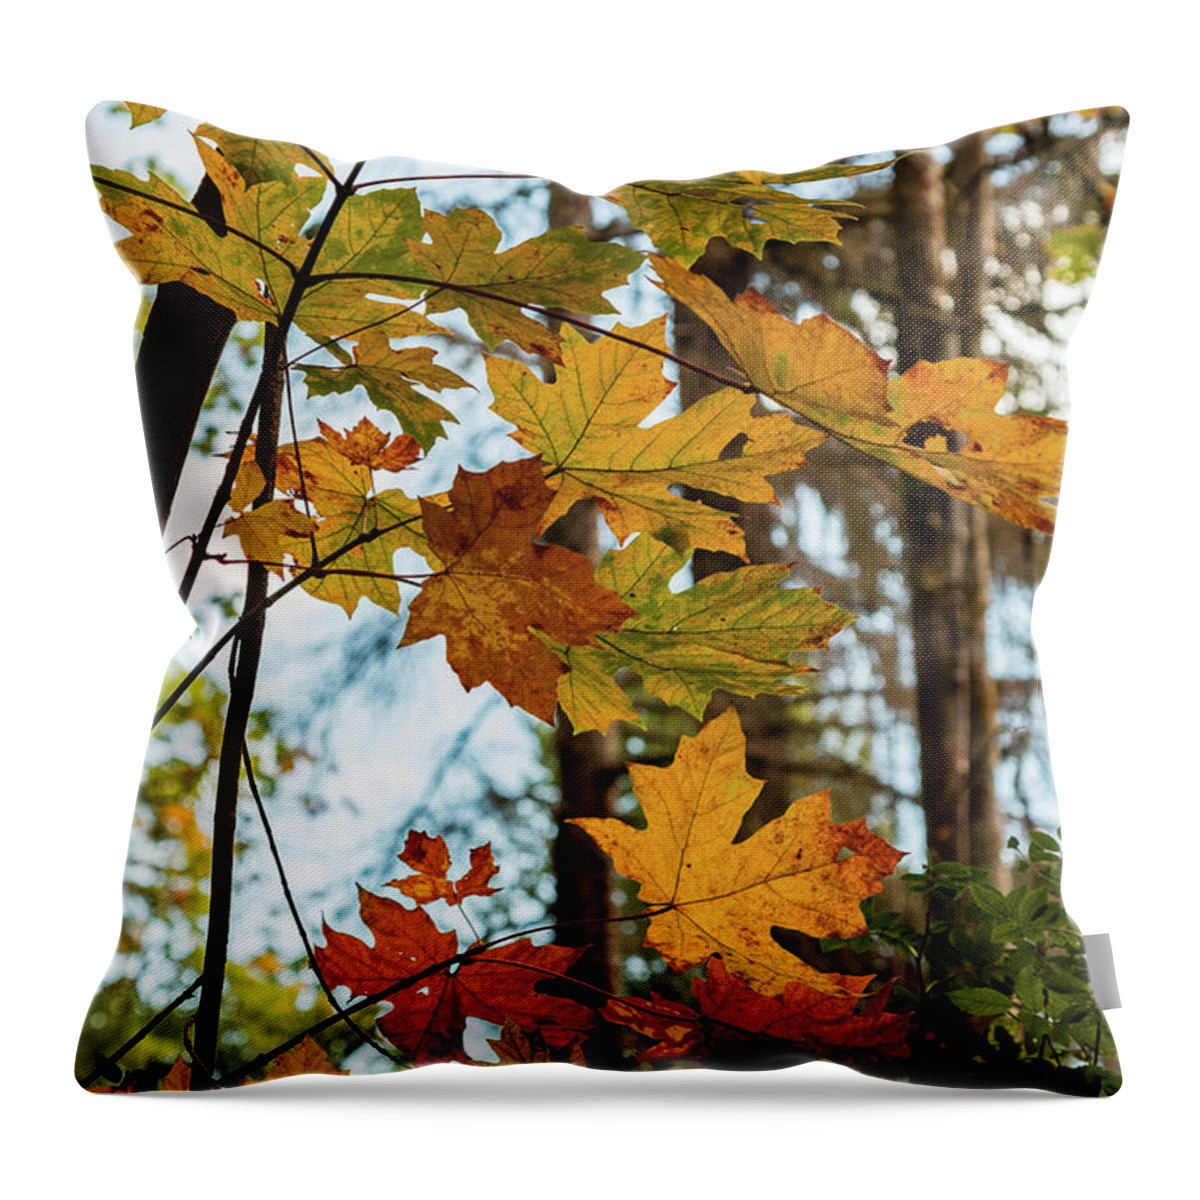 Landscapes Throw Pillow featuring the photograph Time Of Change by Claude Dalley